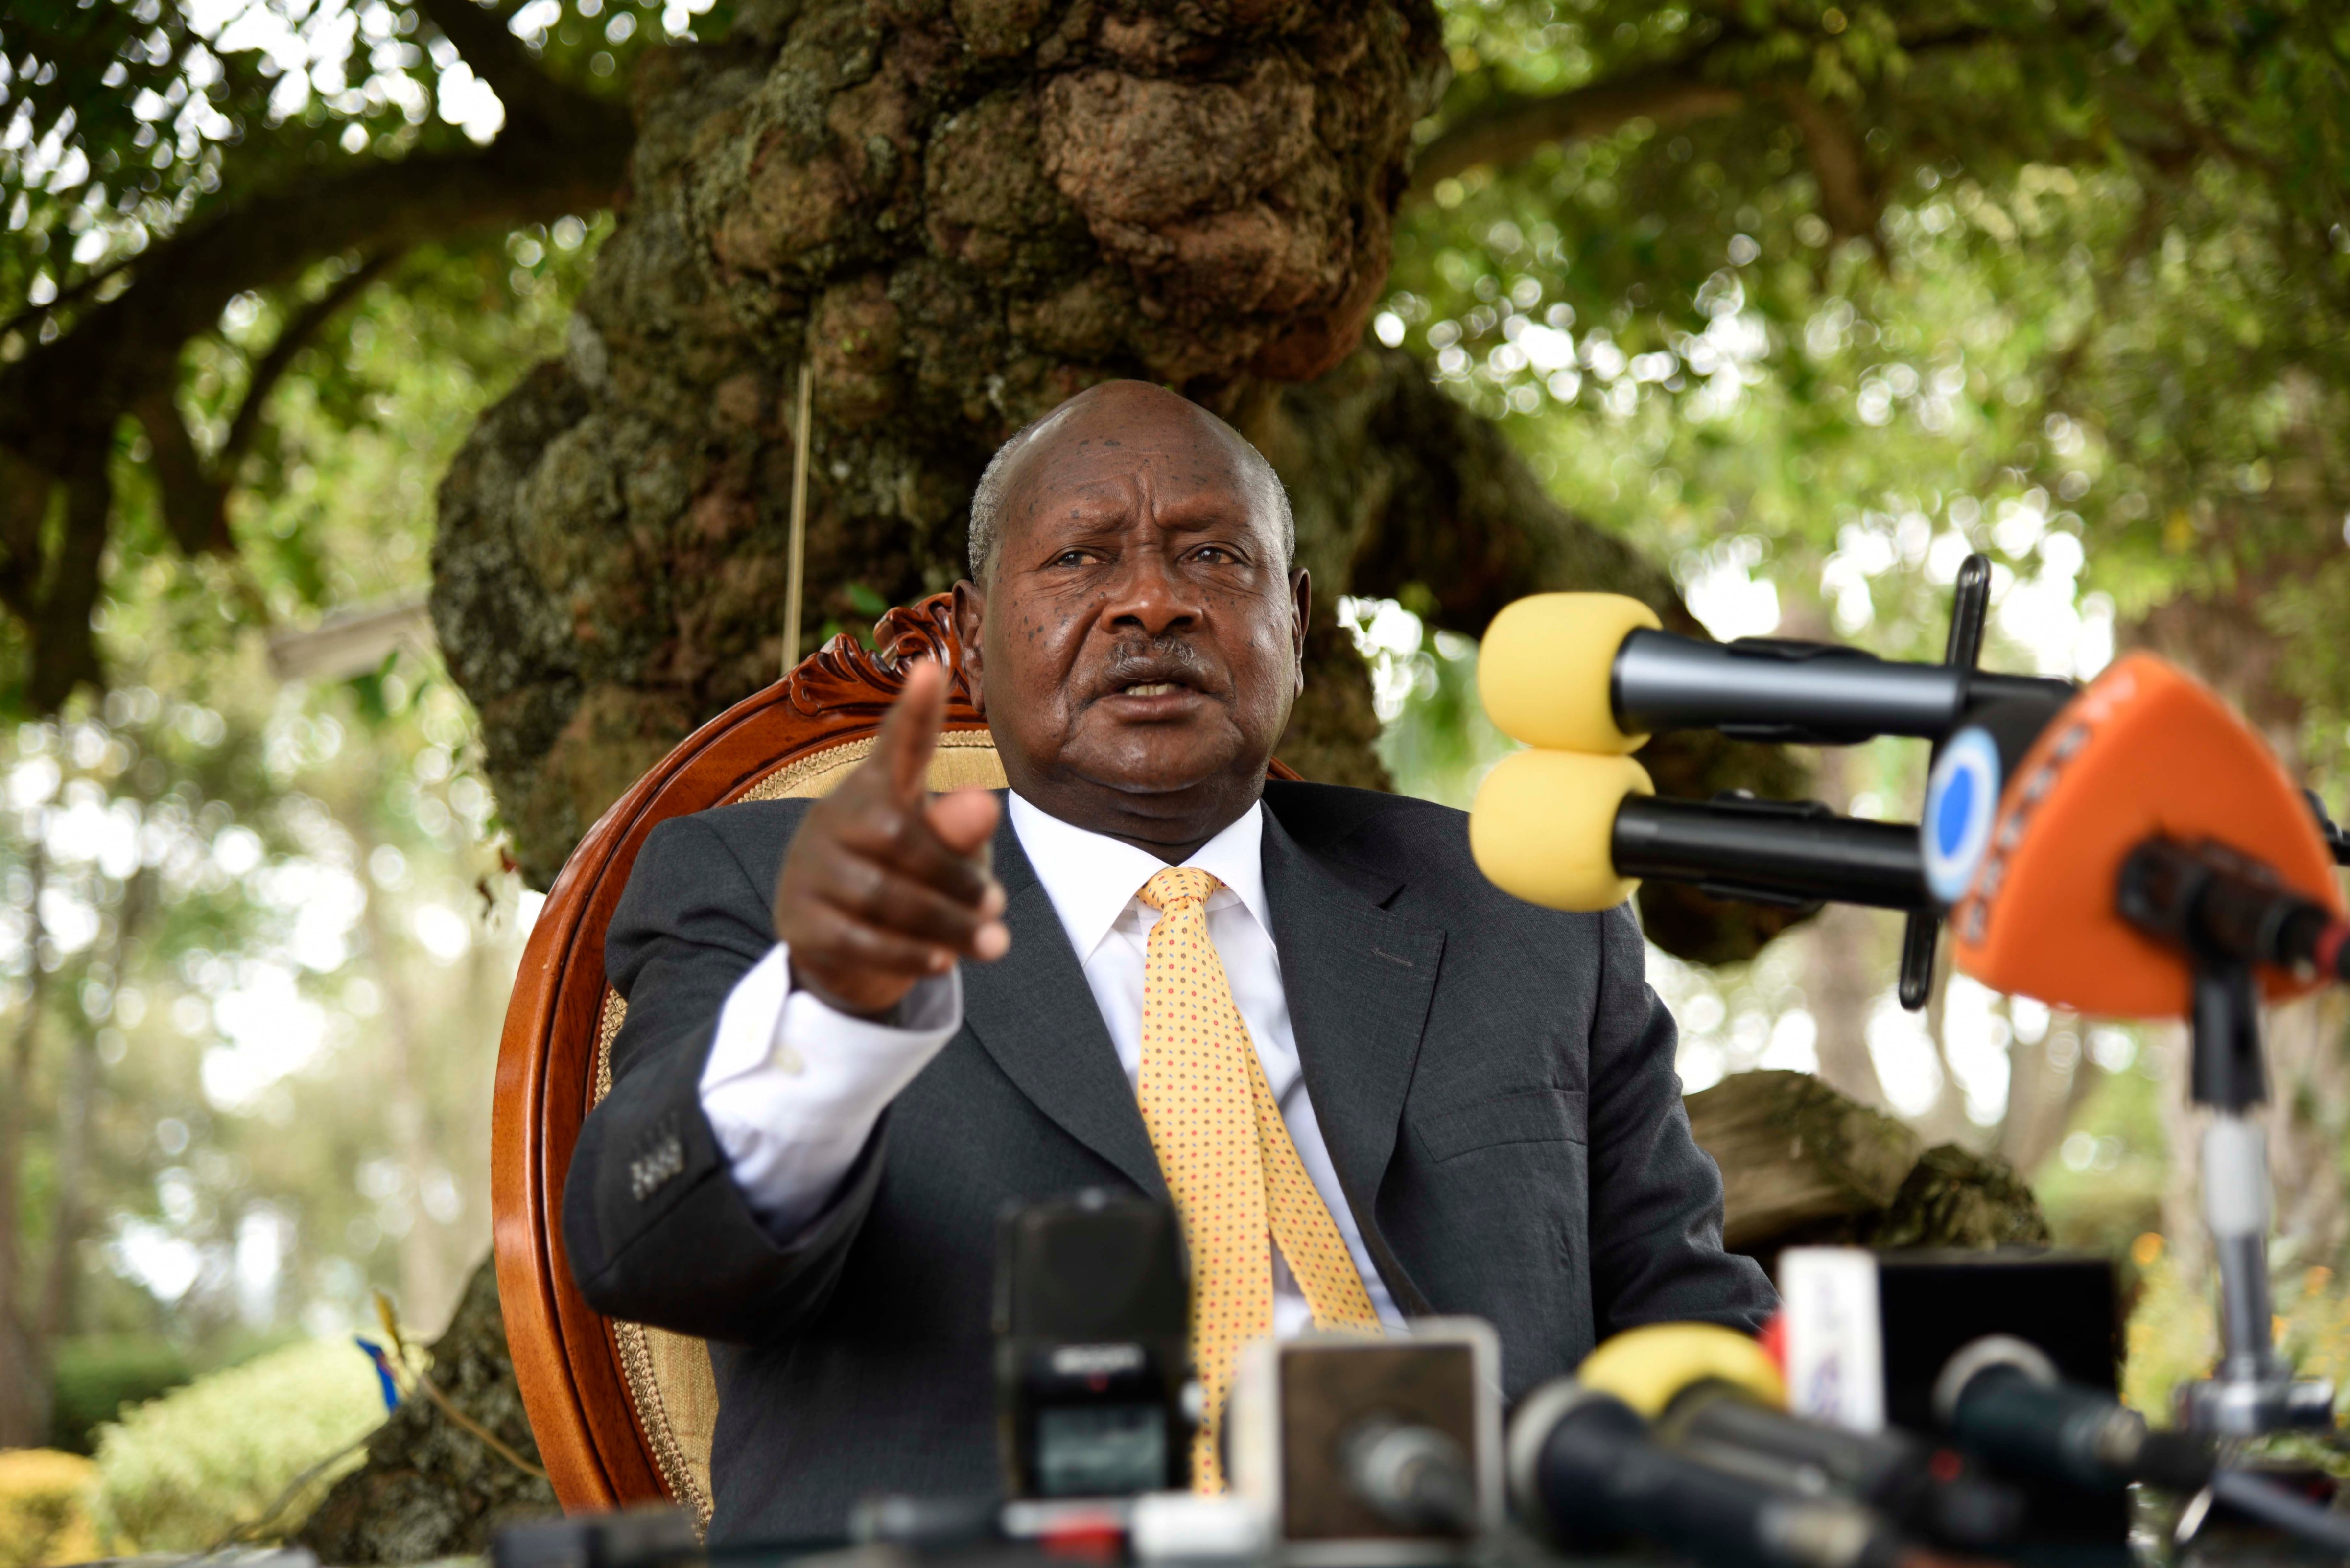 Newly re-elected president Yoweri Museveni, in power since three decades, gestures as he speaks during a press conference at his country house in Rwakitura on Feb. 21, 2016. (Isaac Kasamani—AFP/Getty Images)